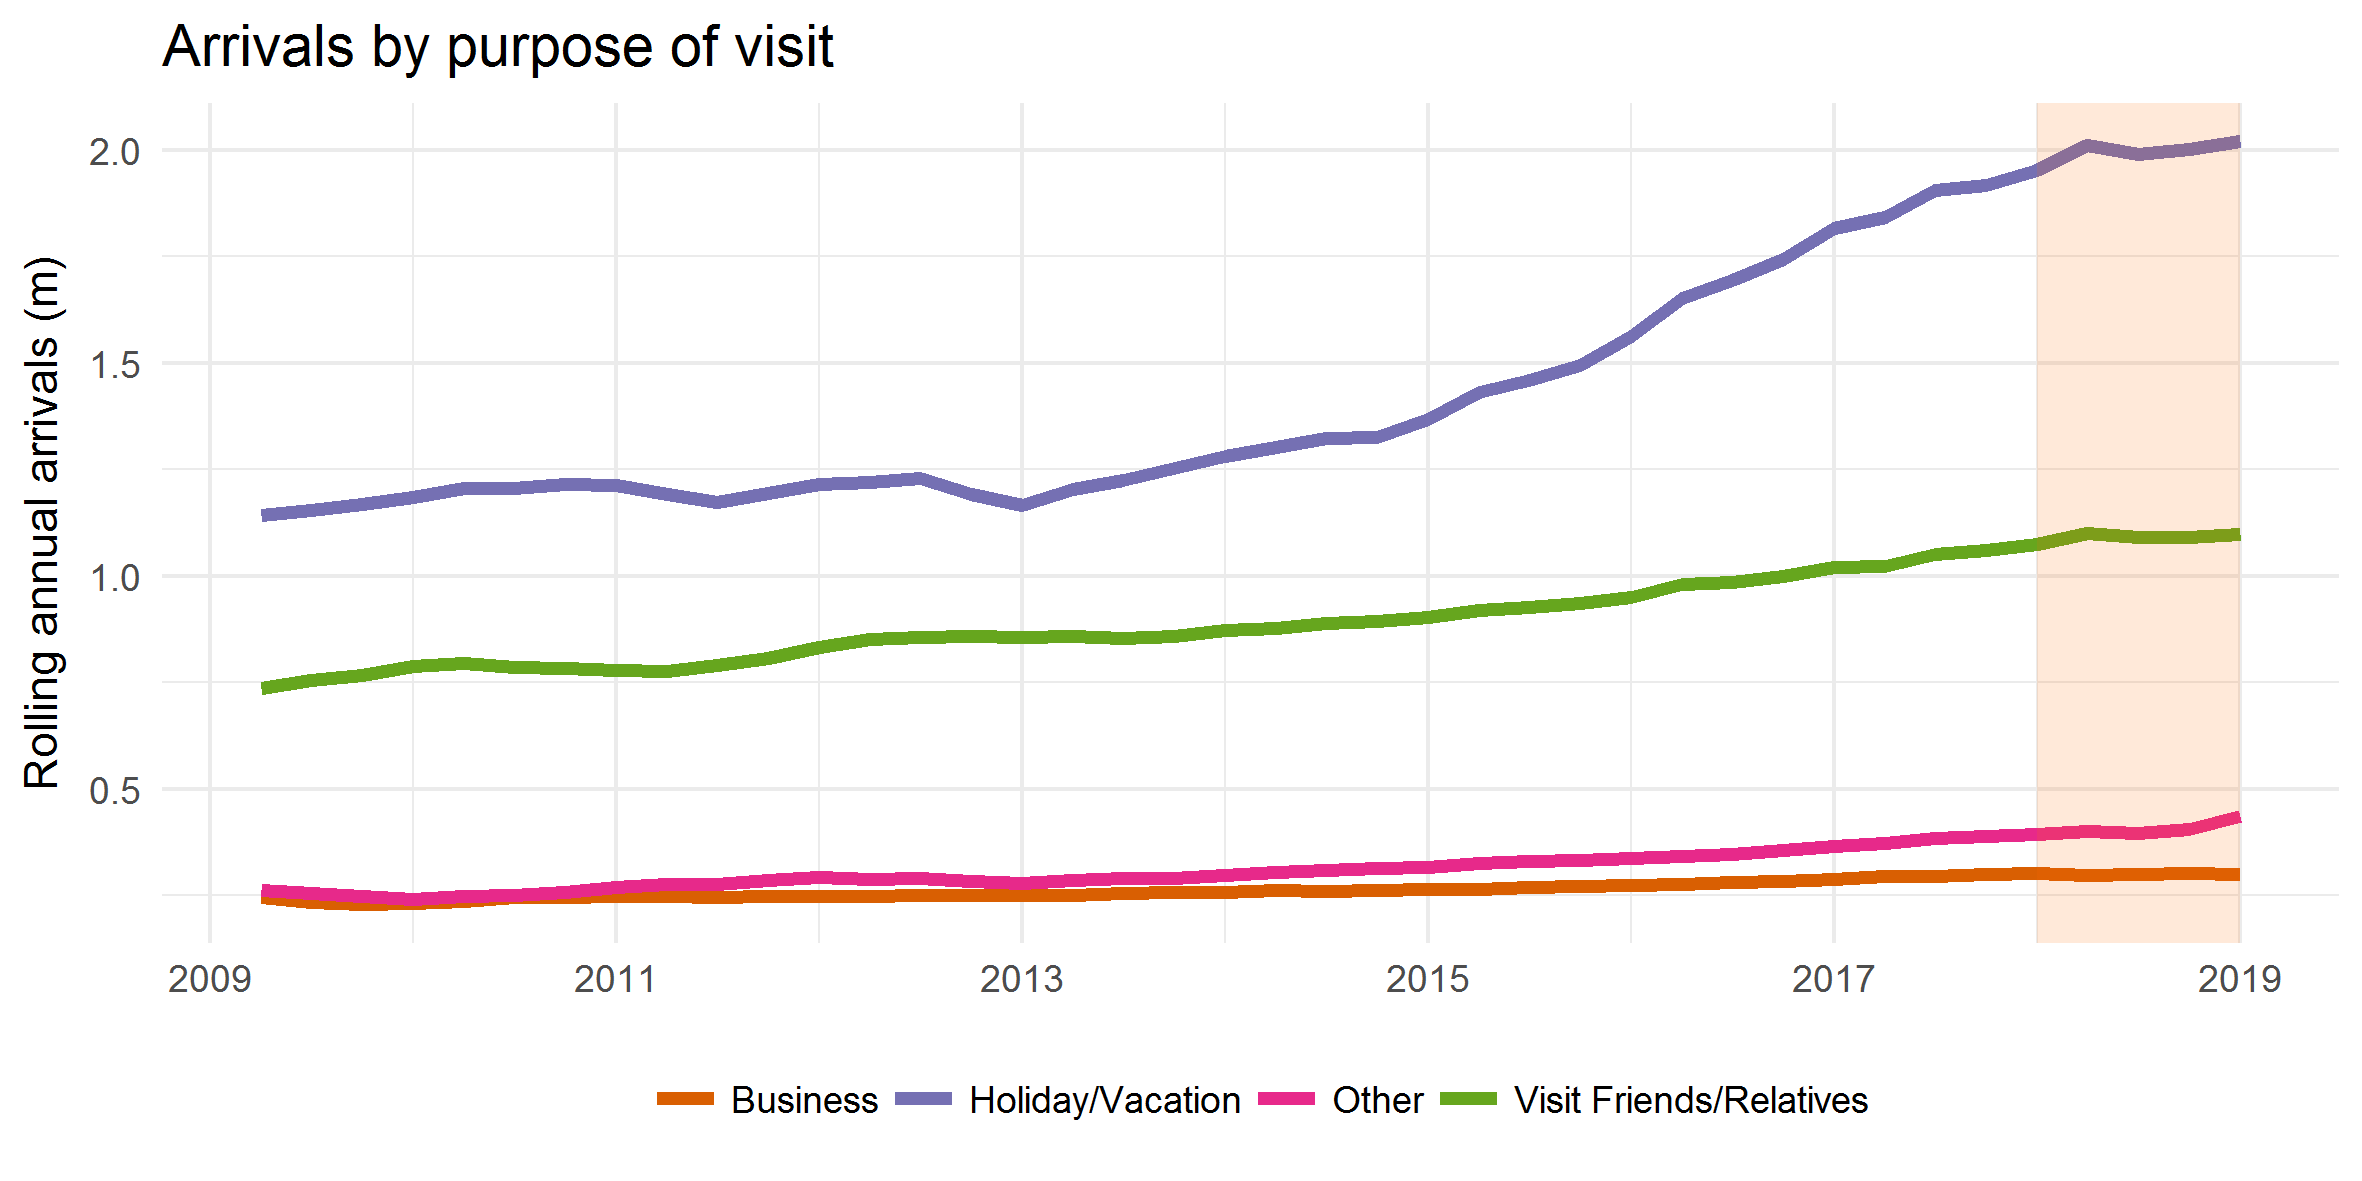 Arrivals by purpose of visit